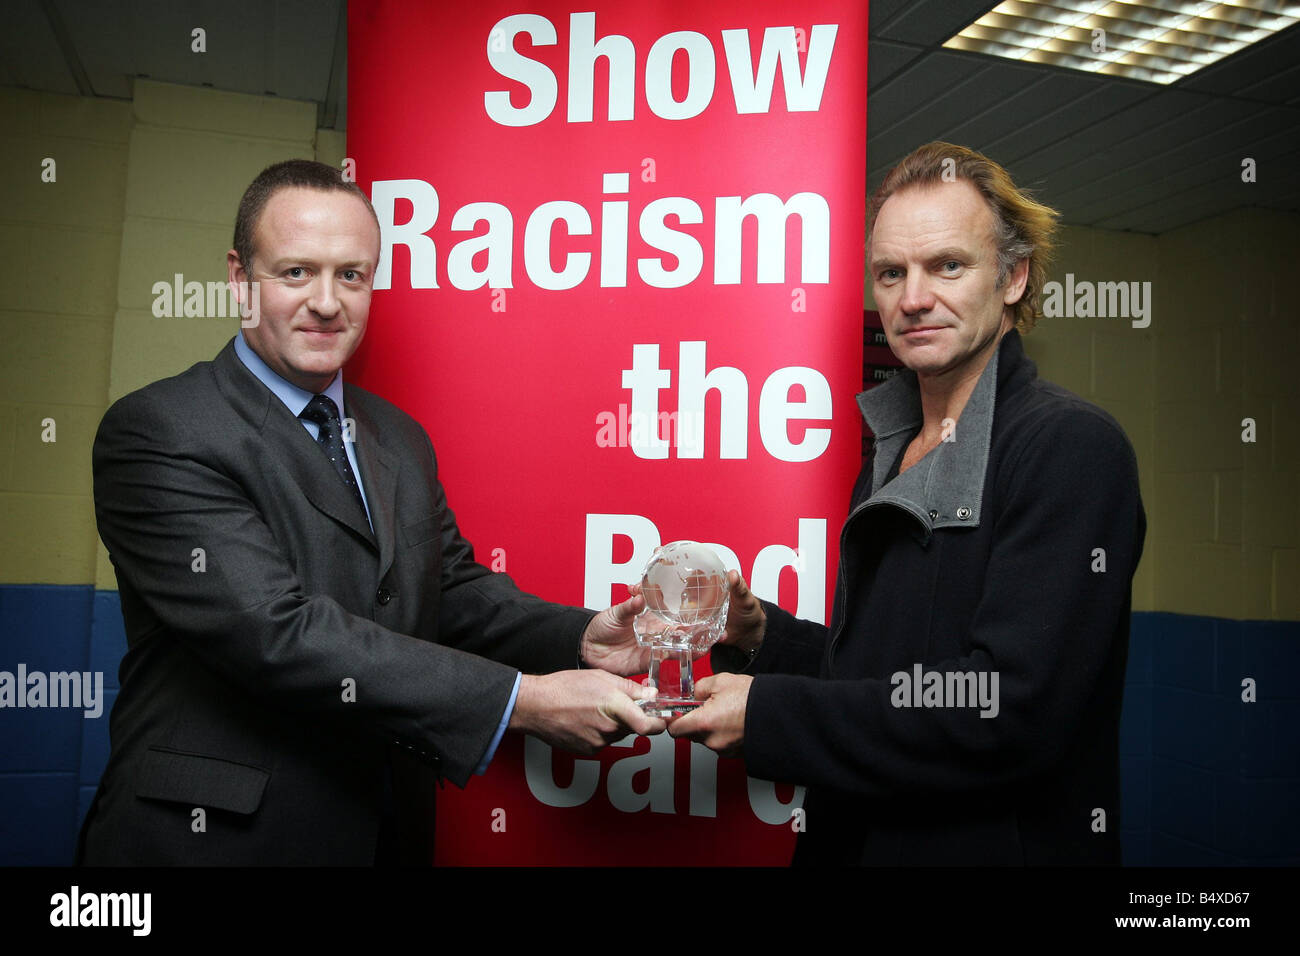 Kevin O Malley from Coutts bank presented Sting with a trophy on behalf of Show Racism the Red Card for all his campaign work At Metro Radio Arena prior to Sting s concert Stock Photo